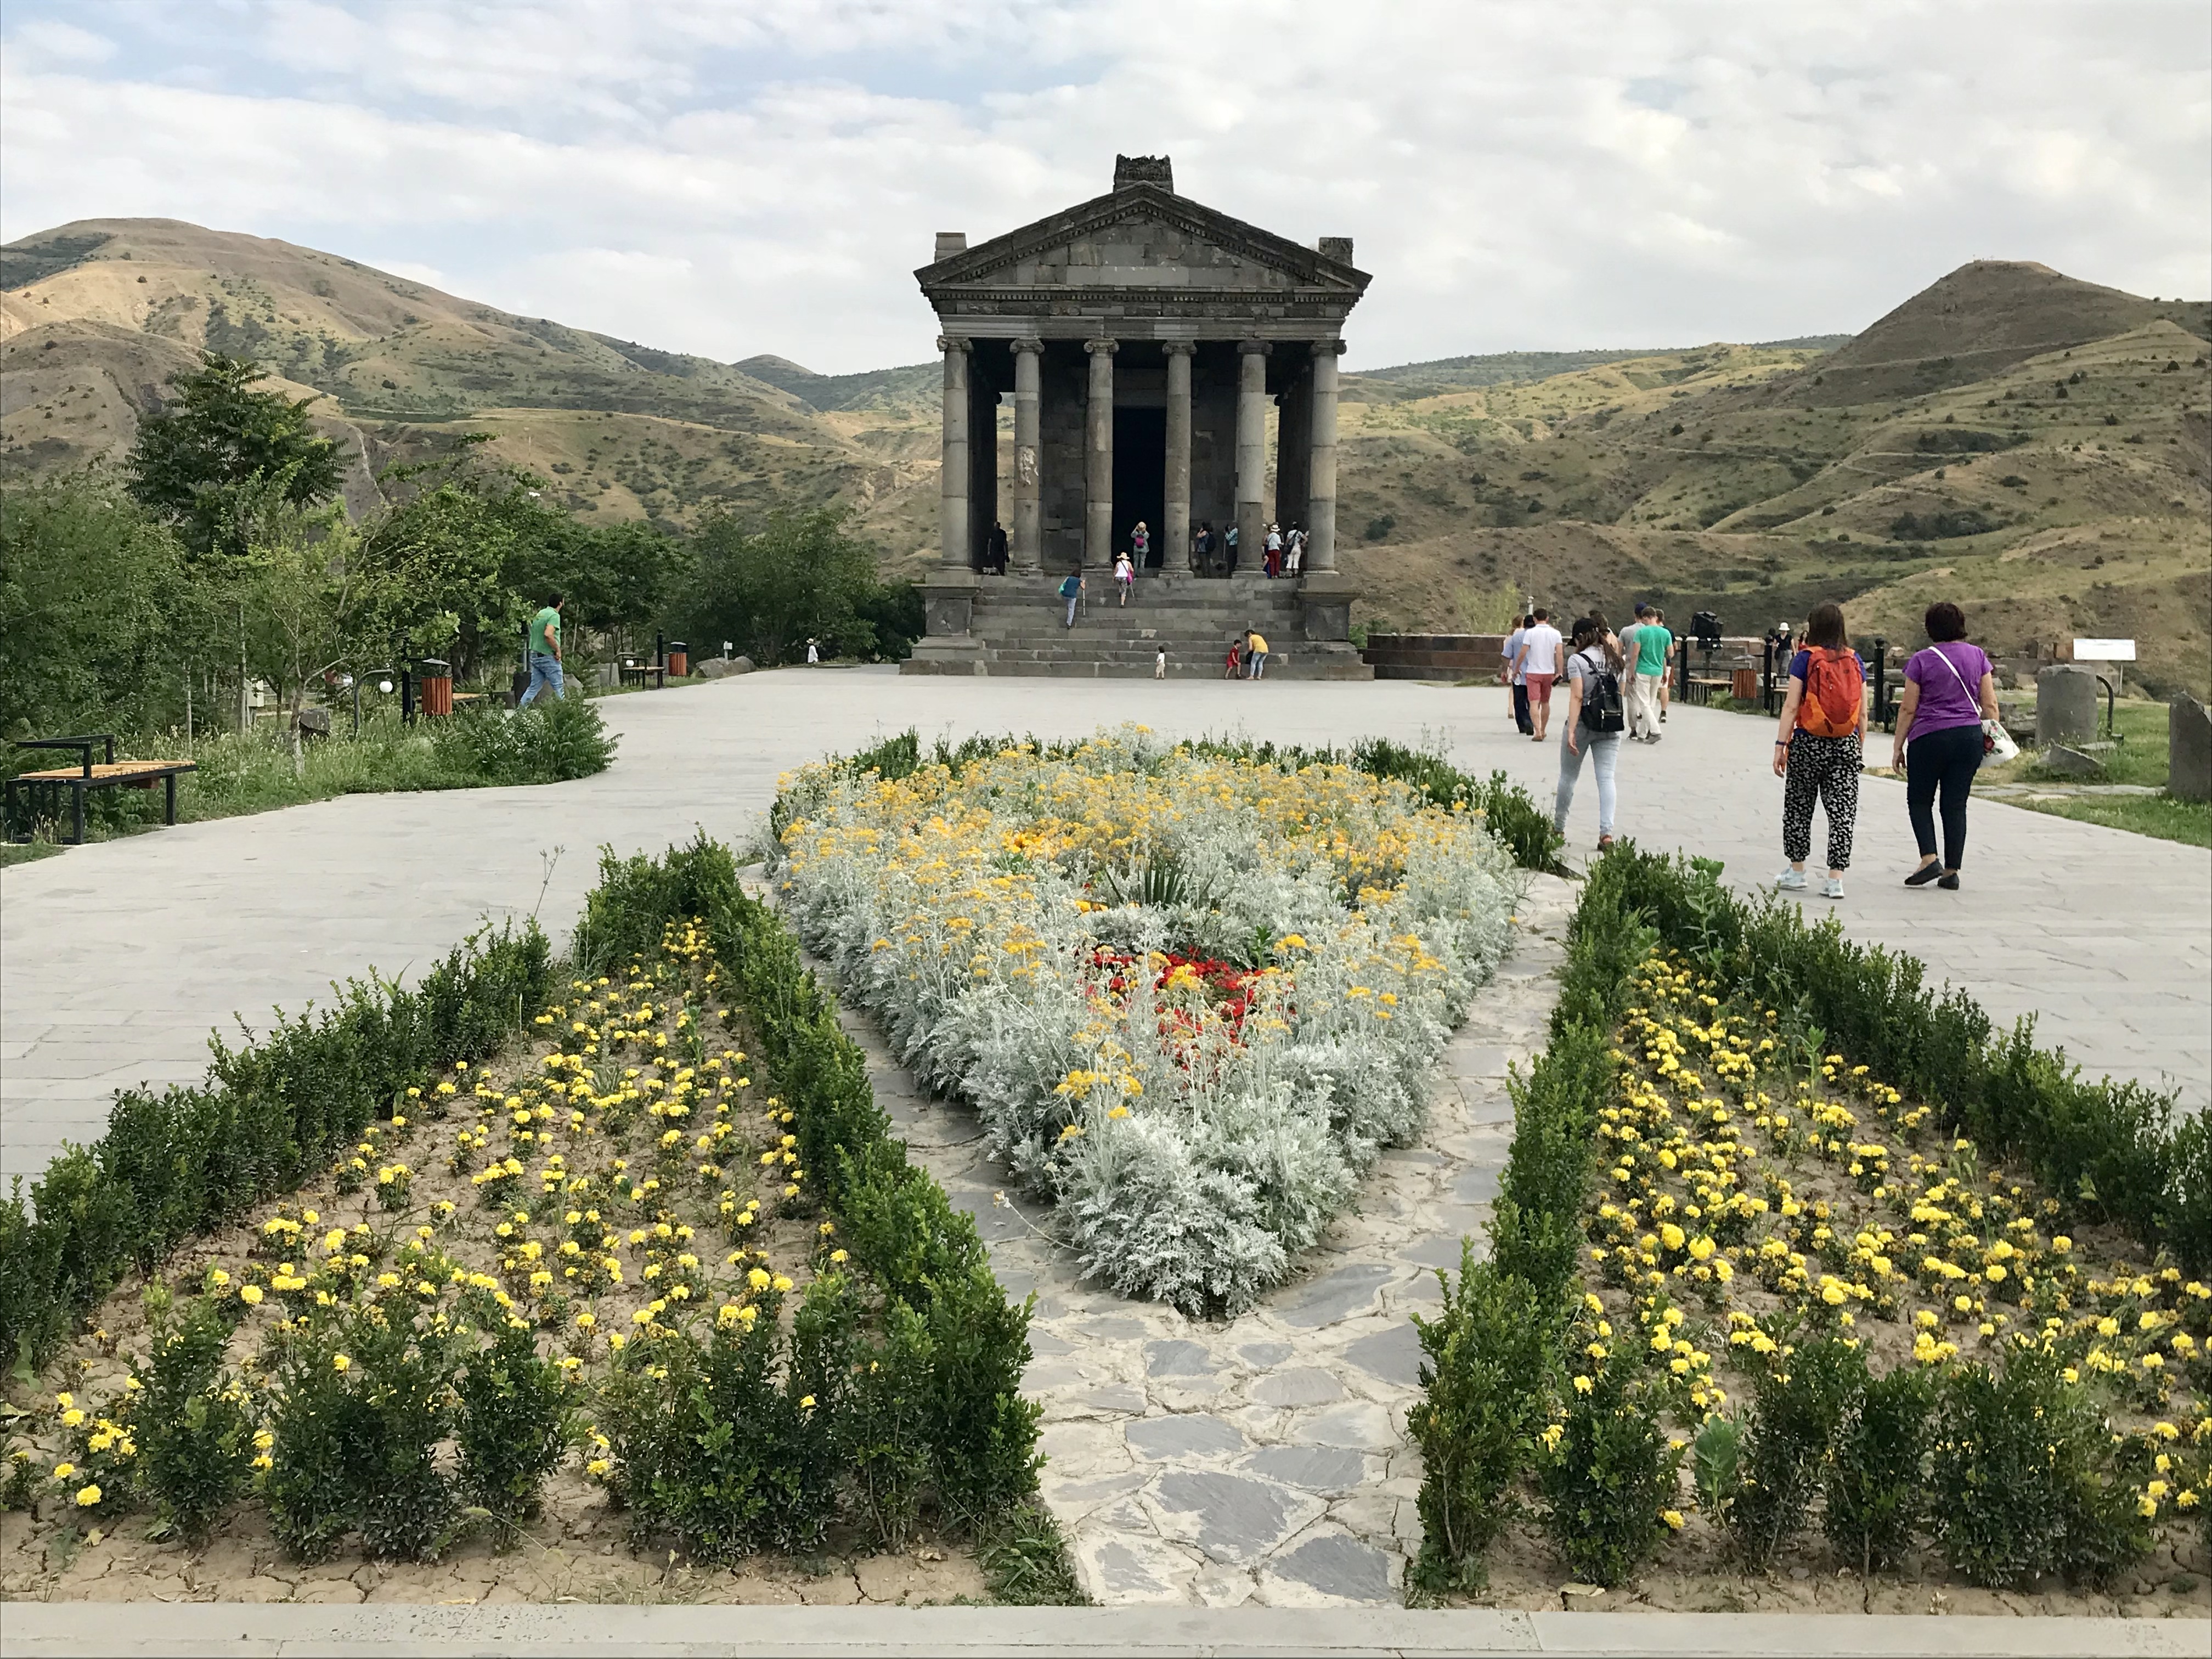 The Temple at Garni, with a bed of red and yellow flowers in the foreground.